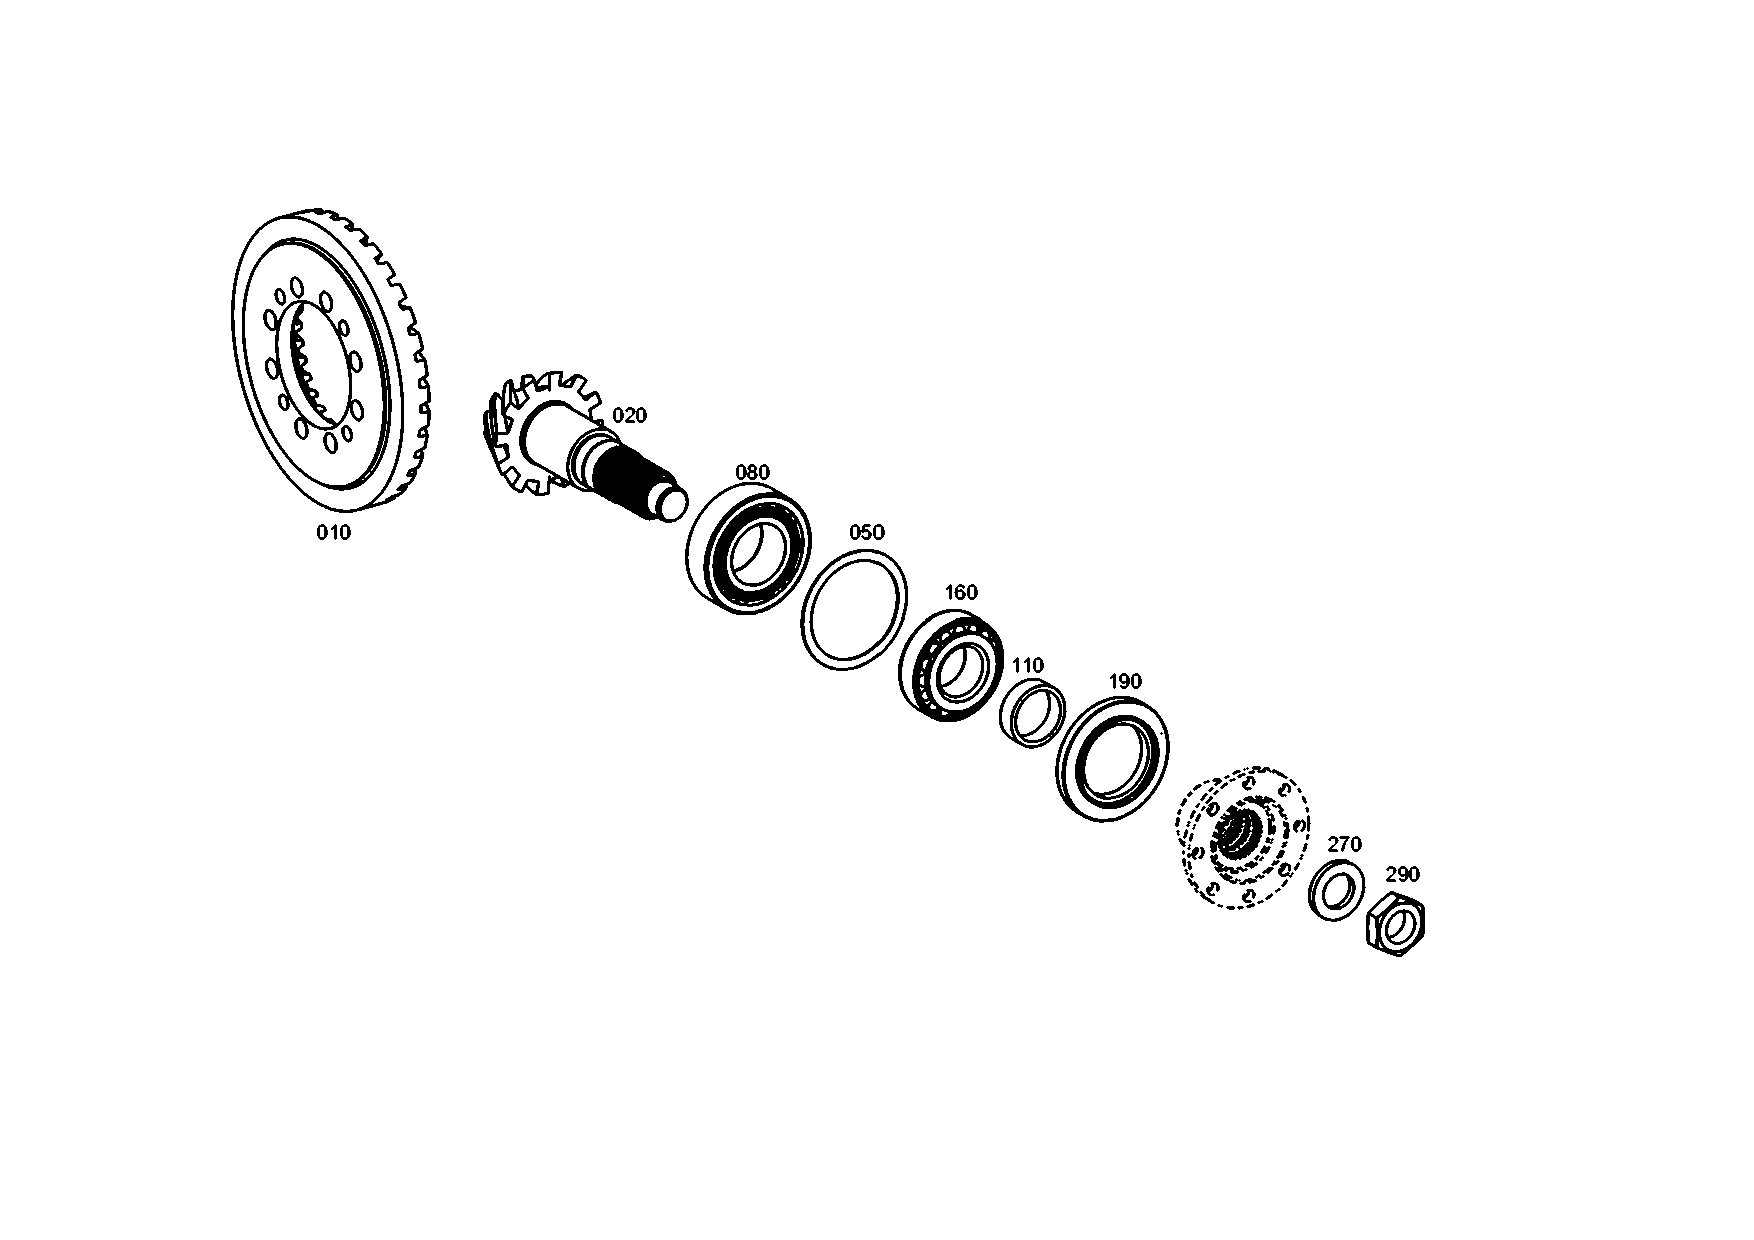 drawing for CATERPILLAR INC. 7029697 - RING (figure 1)